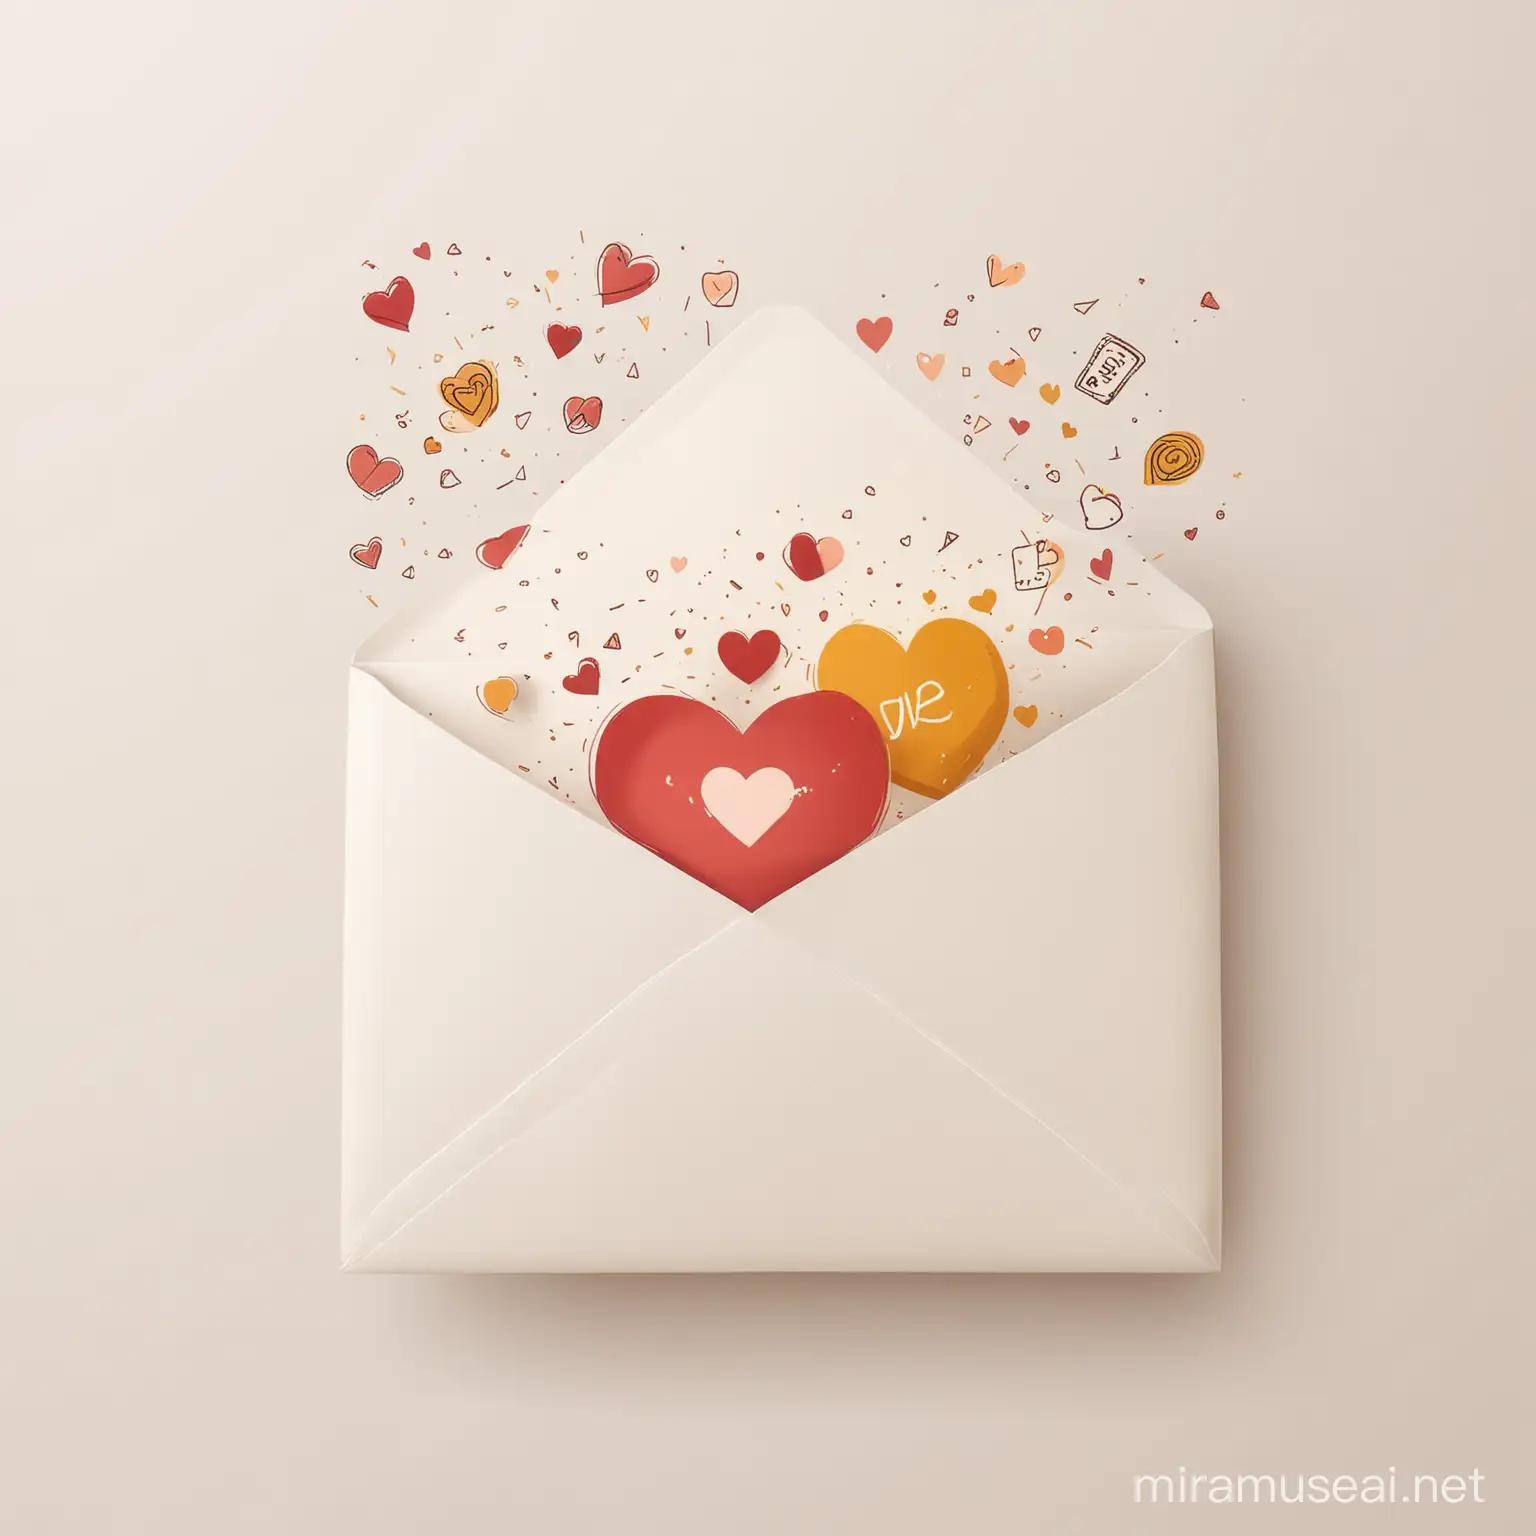 Envelope with heart-shaped budget symbols flying out, Love your budget, Warm and inviting colors, Minimalistic art style, Low level of detail, vector, contour, white background.